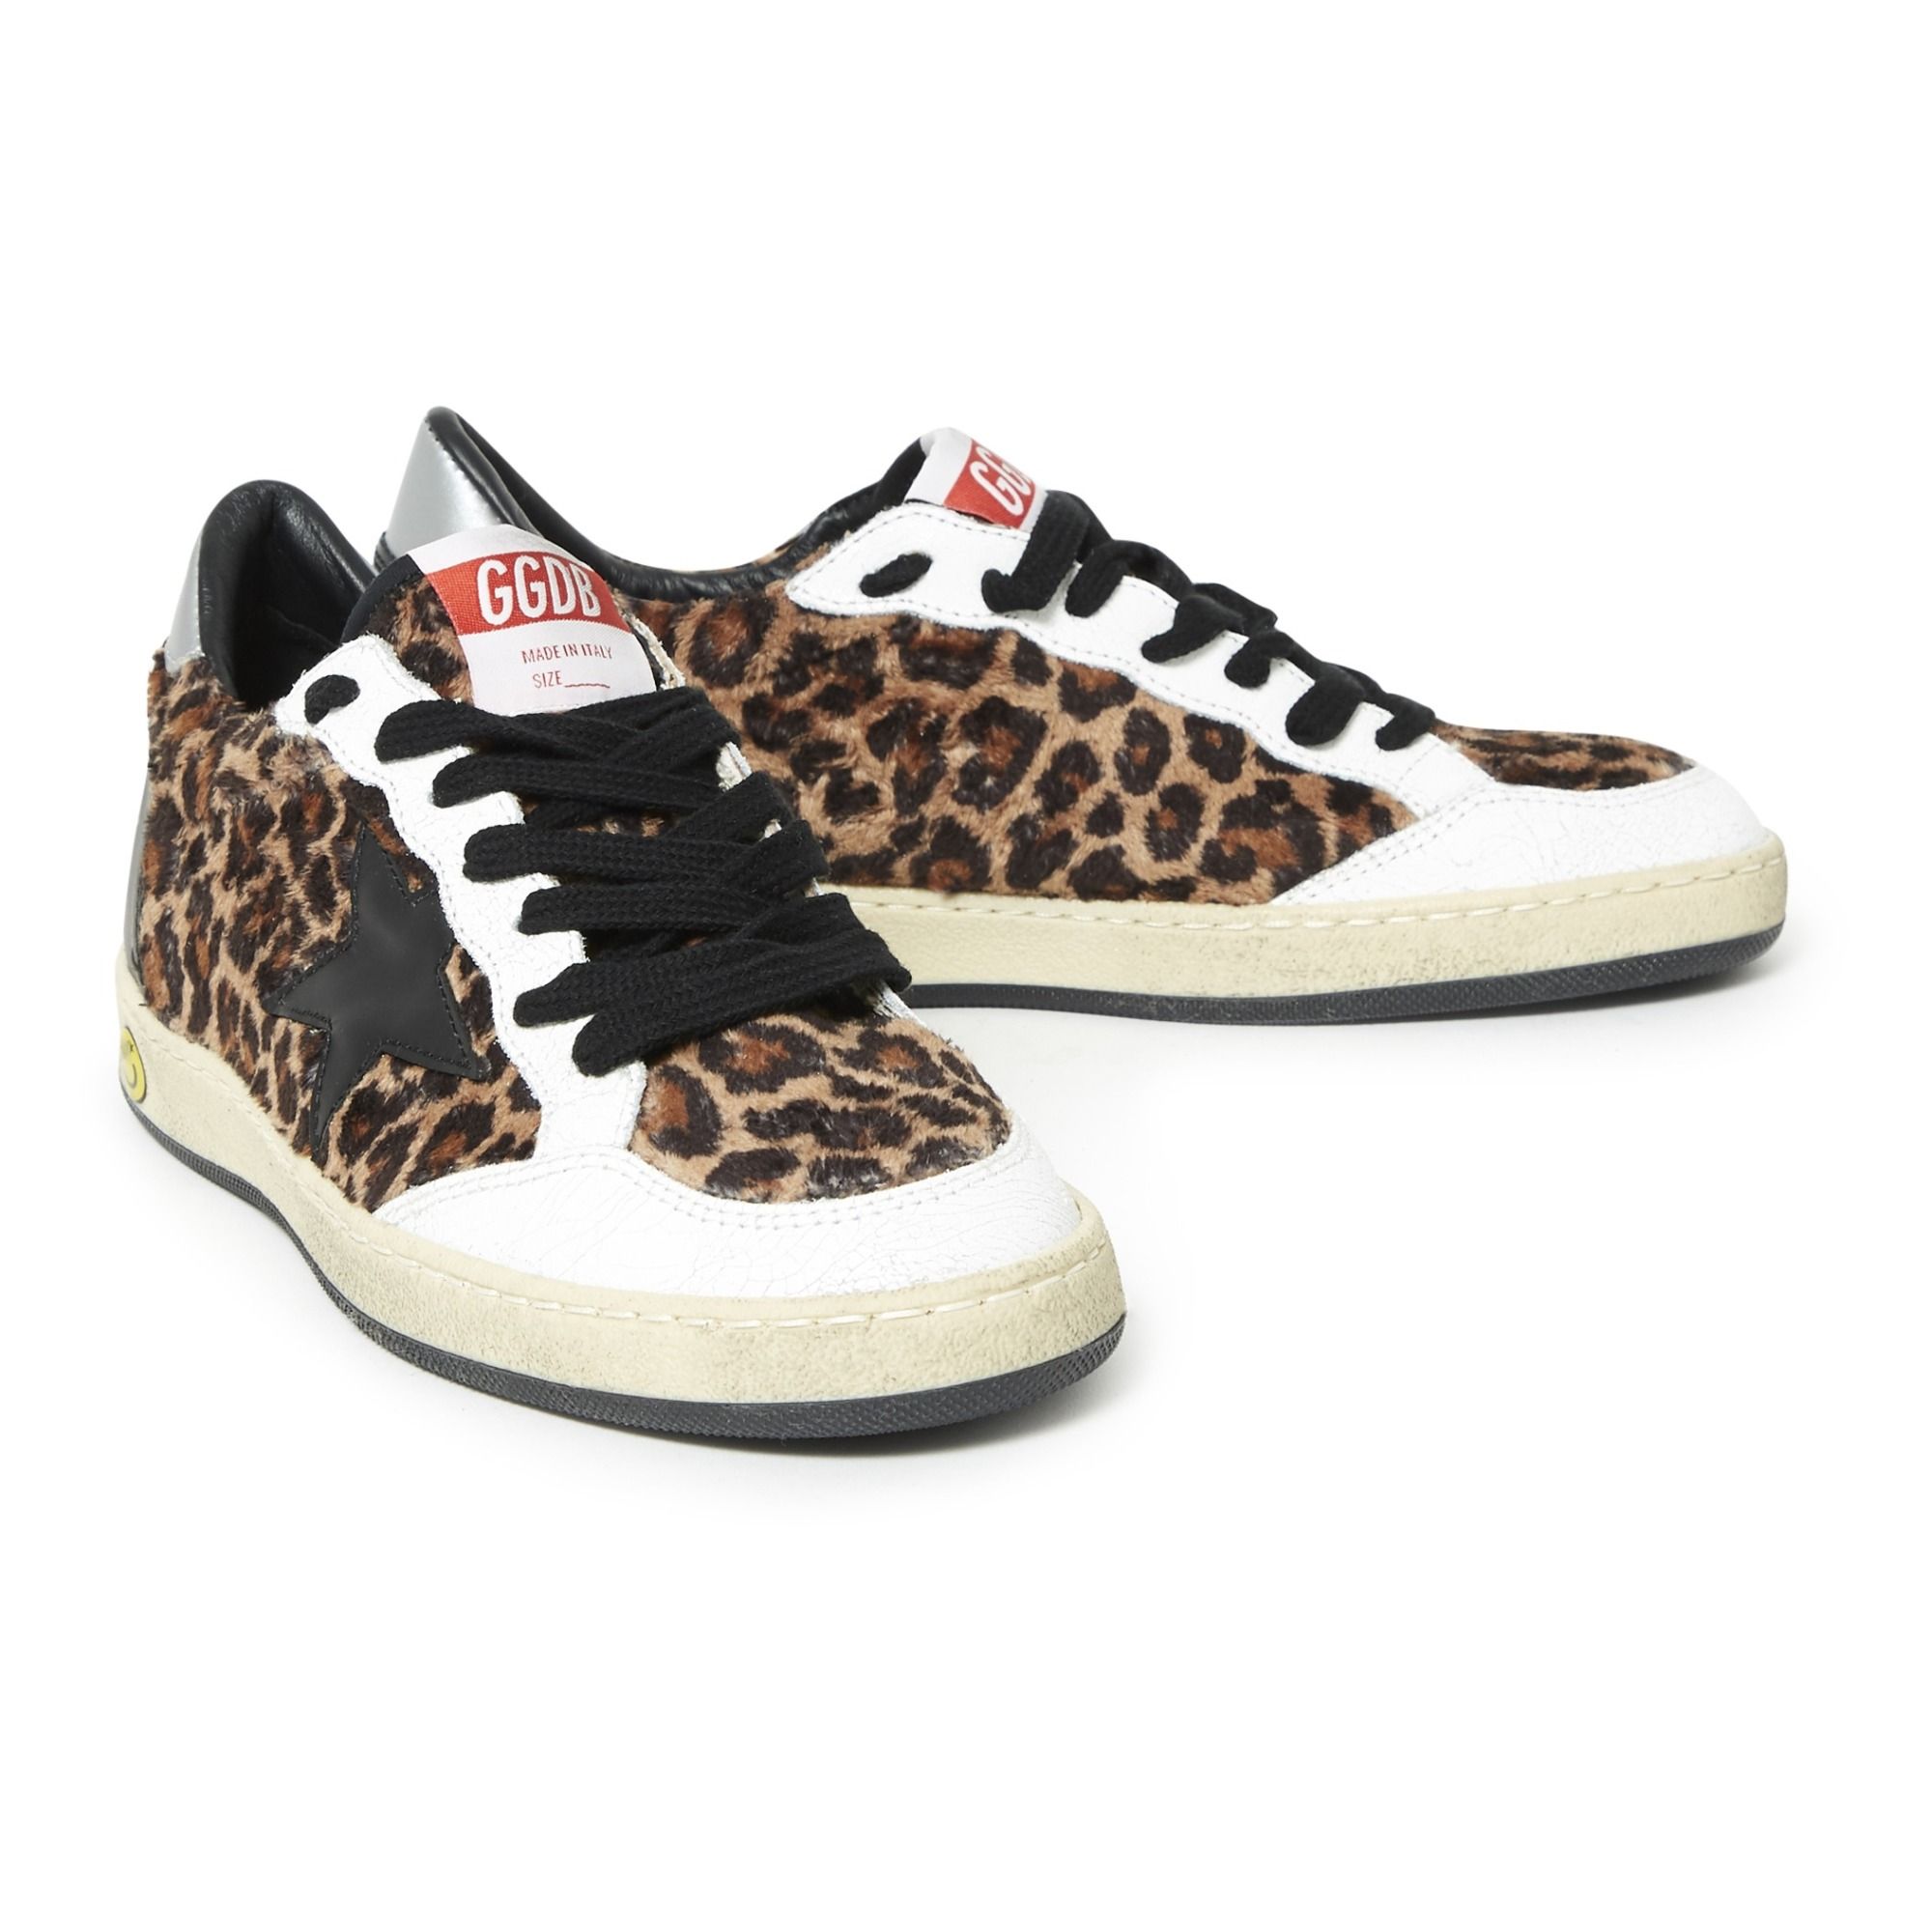 Leopard Laced Trainers Black Golden Goose Deluxe Brand Shoes Teen